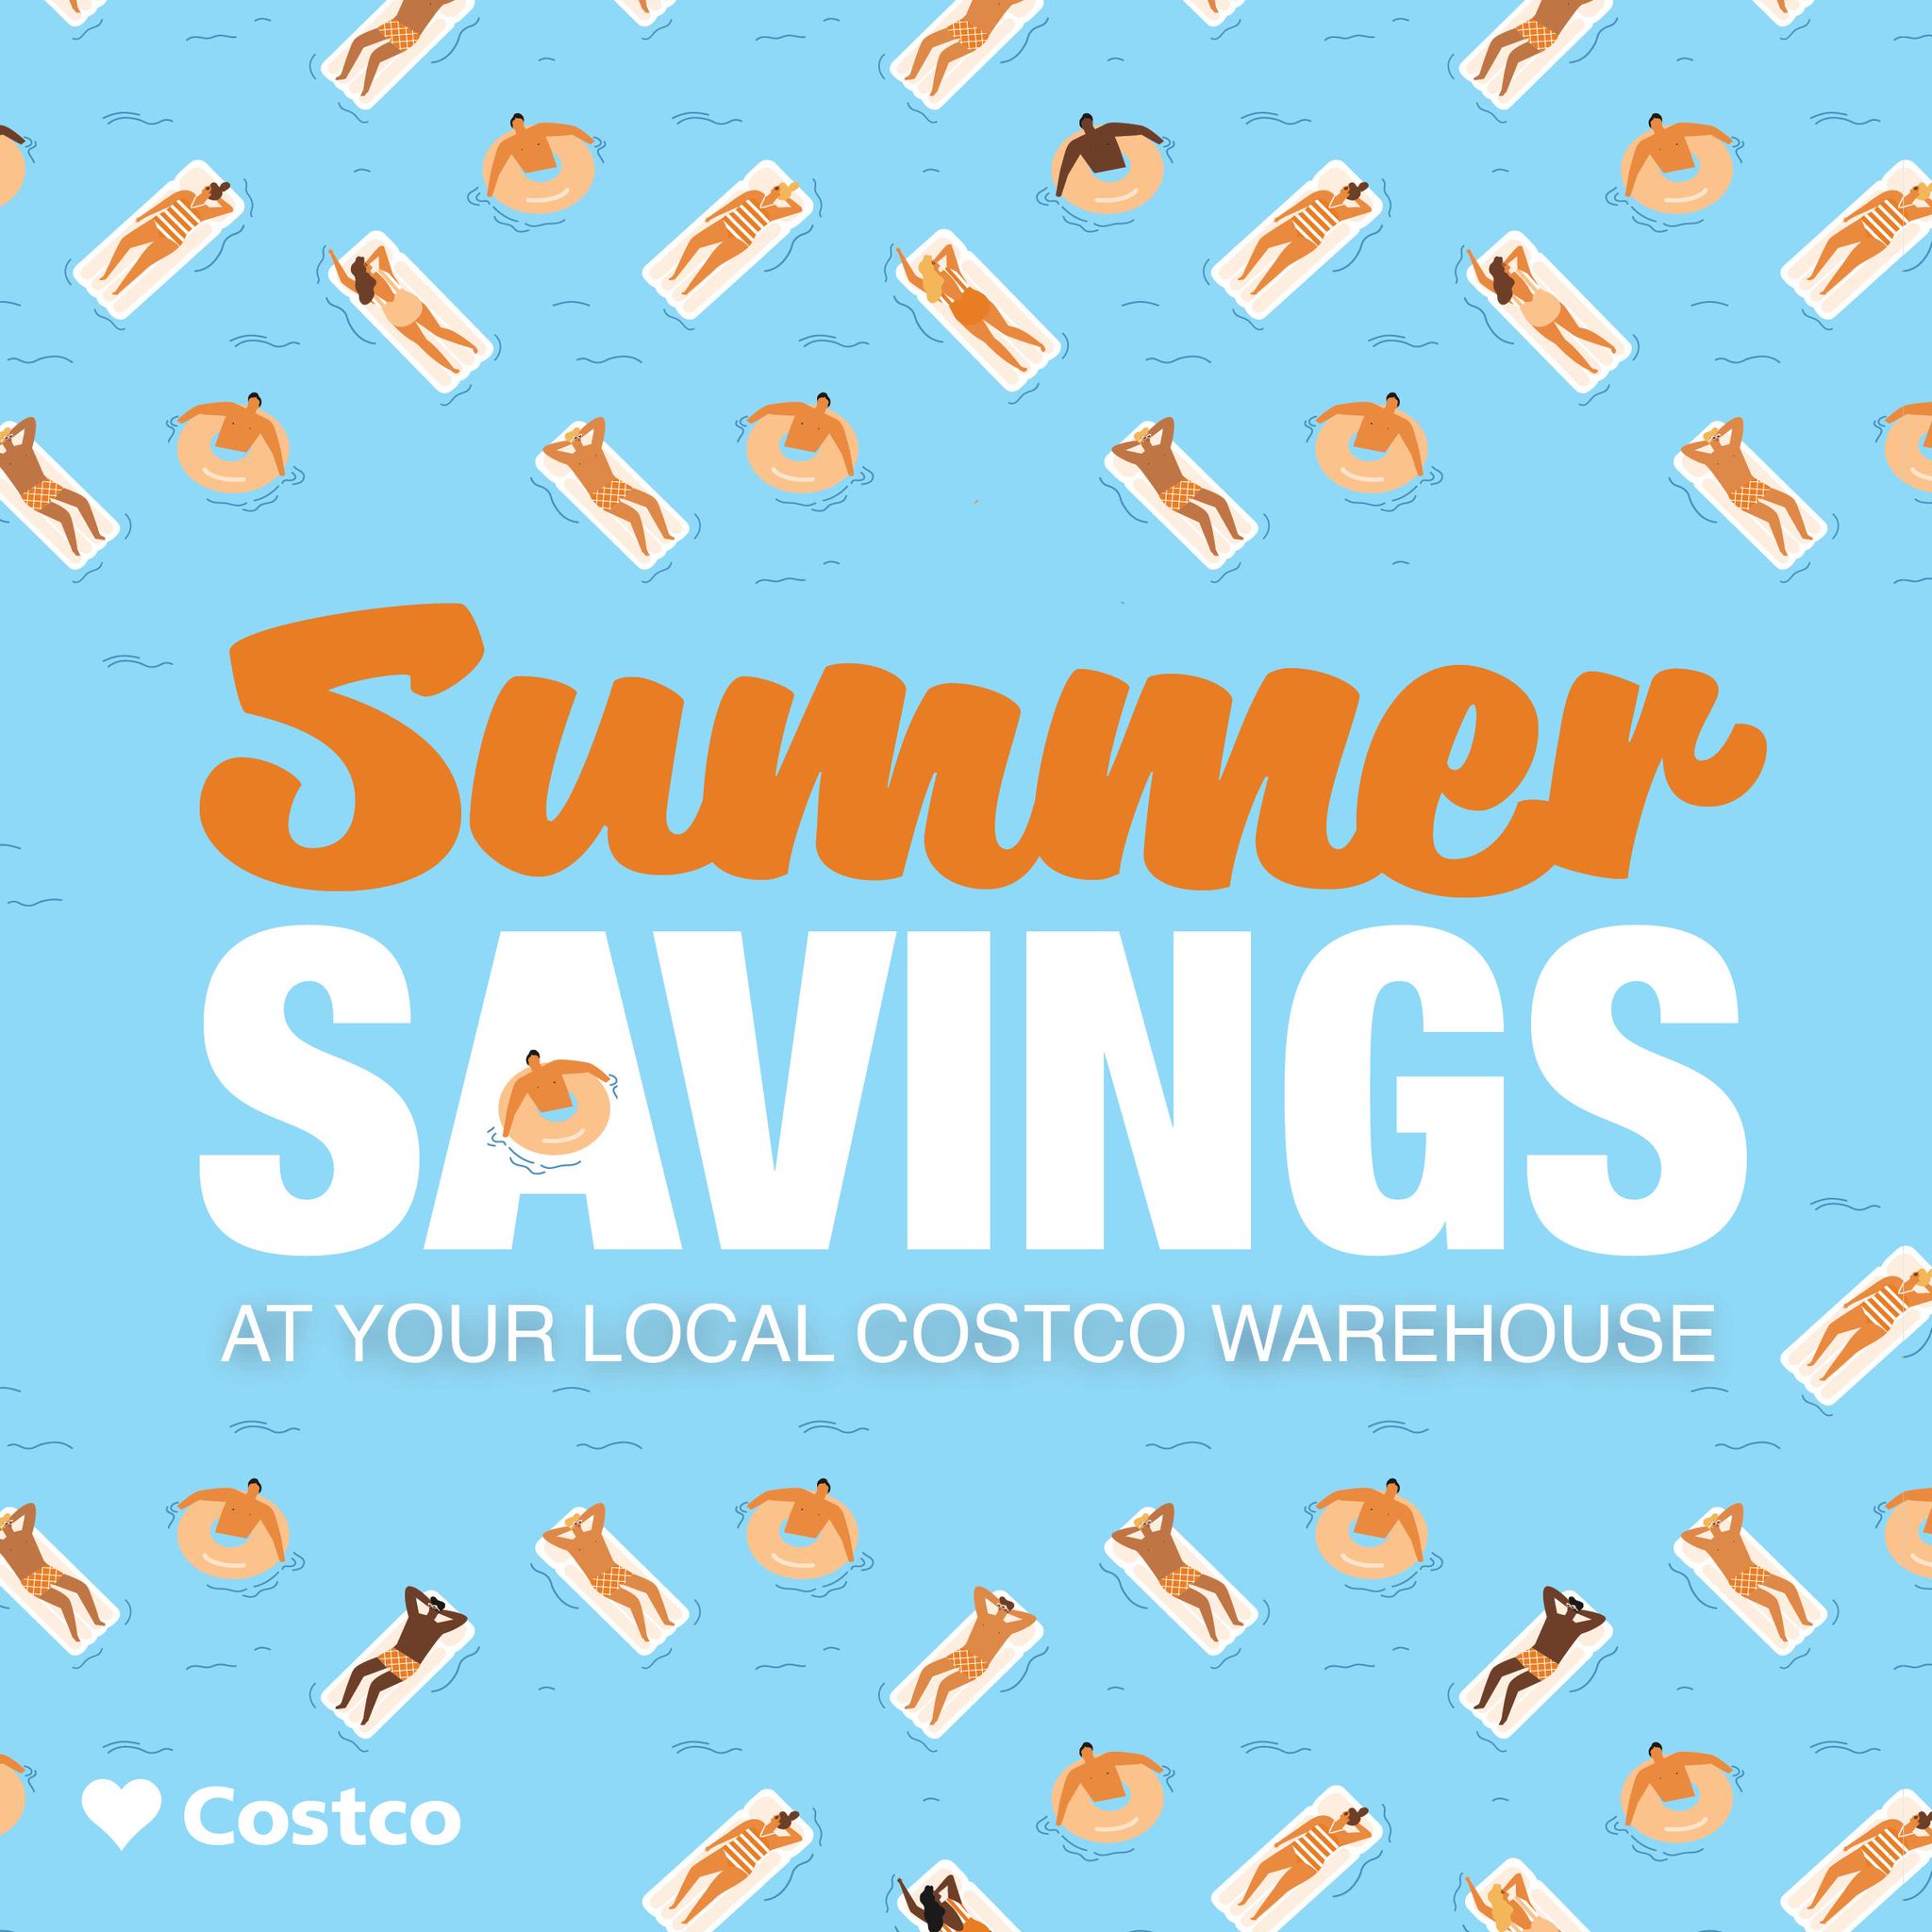 costco-canada-on-twitter-find-this-week-s-warehouse-savings-right